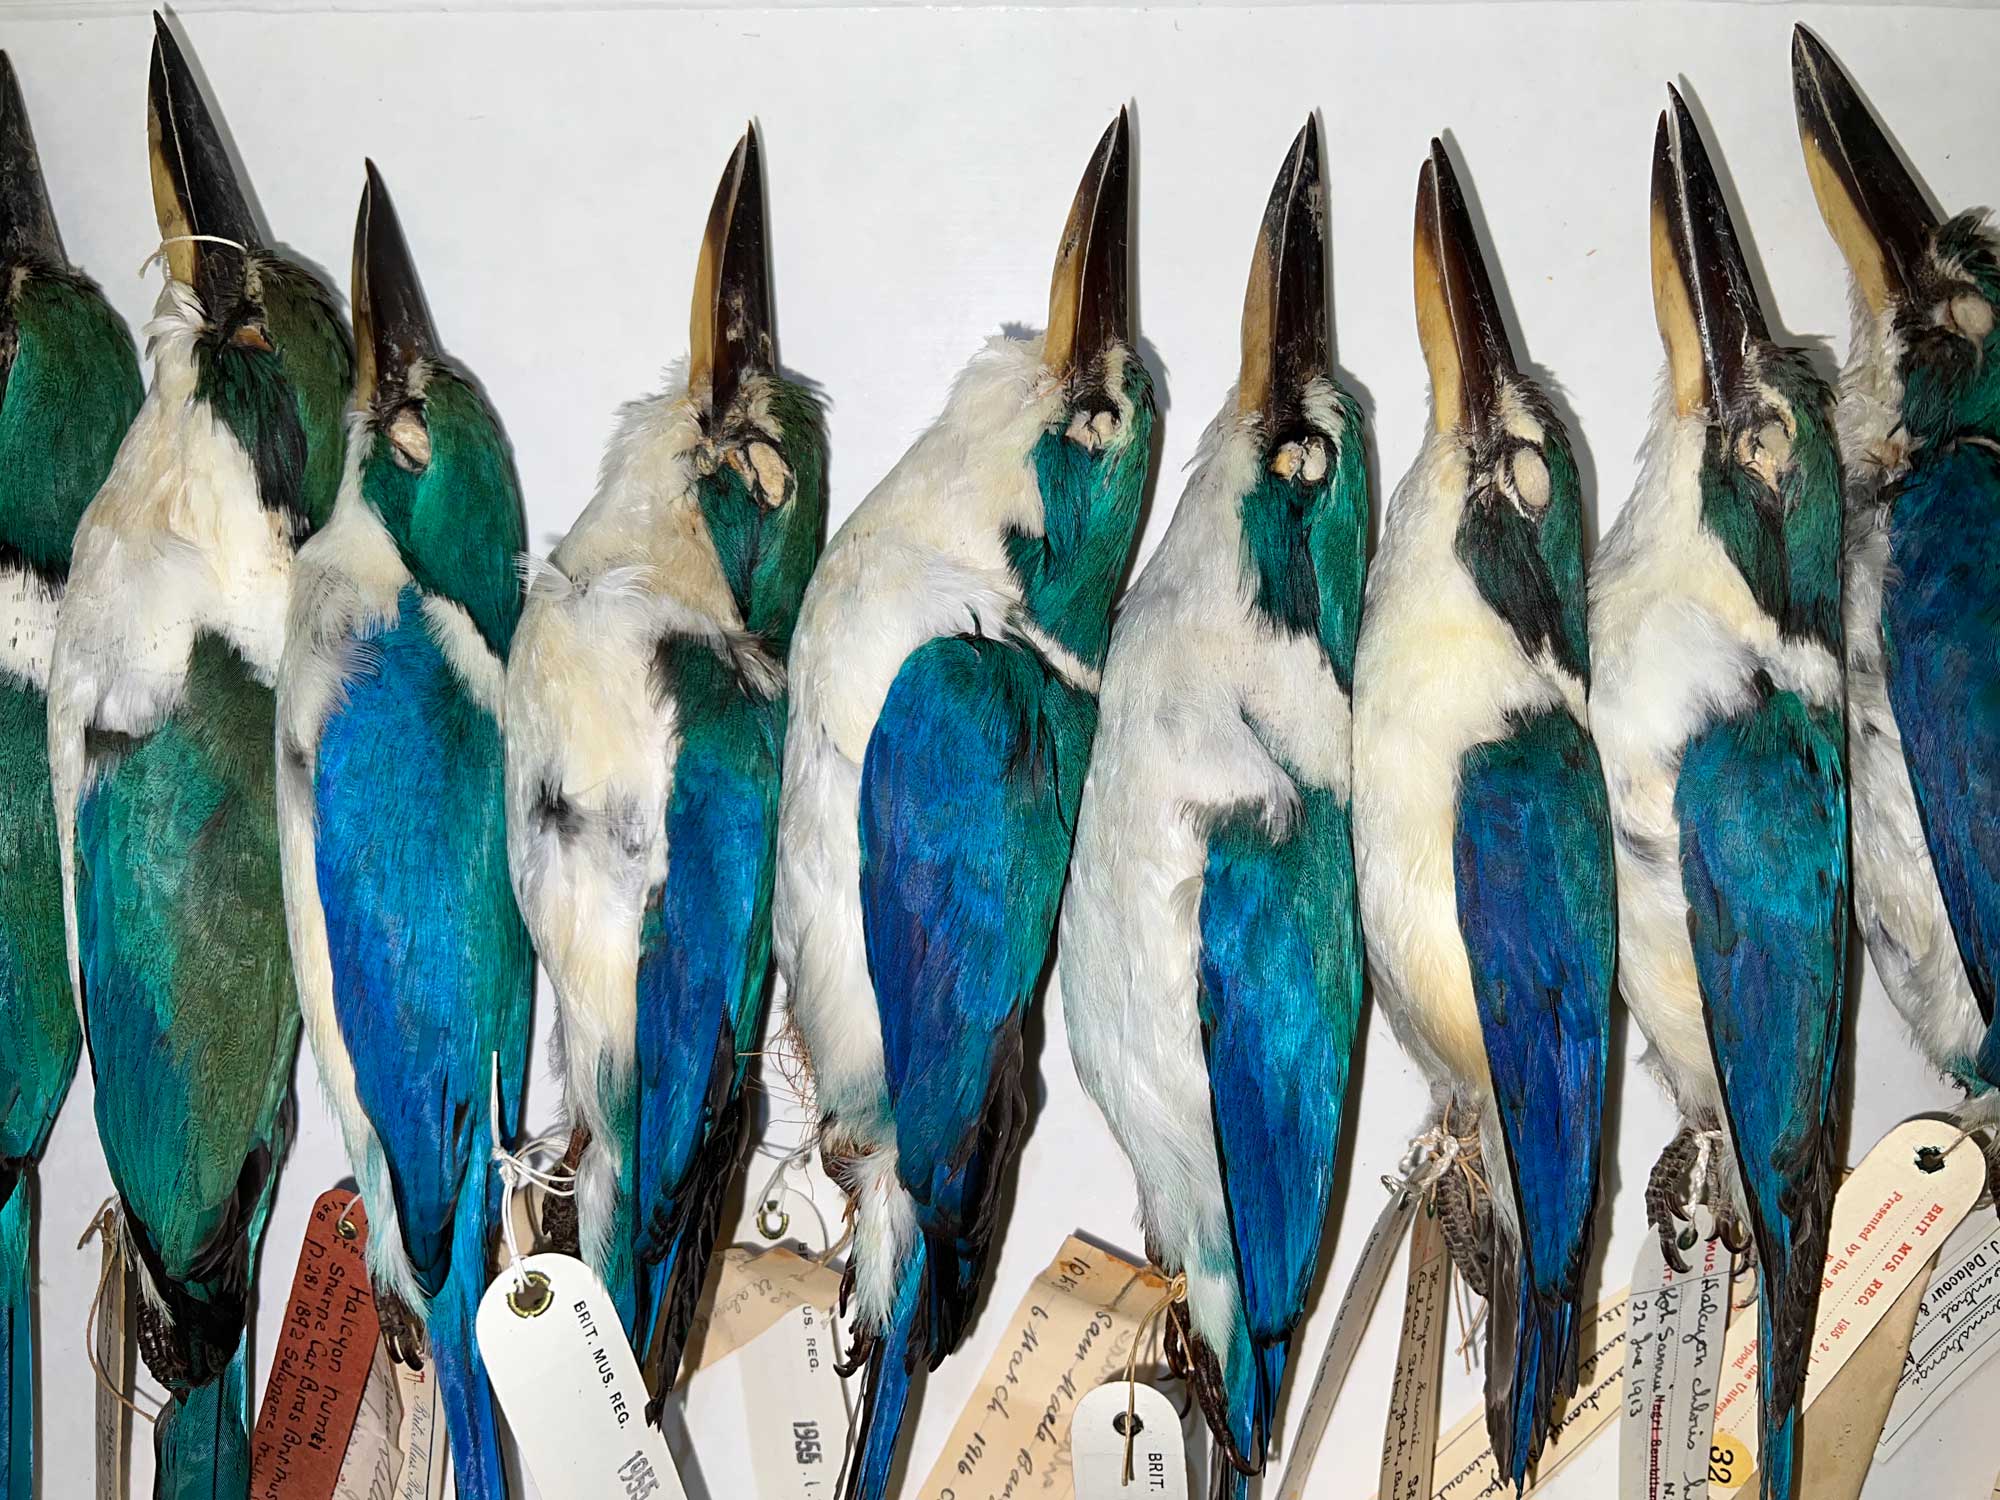 Preserved specimens of collared kingfishers from India held in the museum. A row of white and blue to blue-green birds are arranged in a row with beaks pointed upward. Labels are attached to their legs and their eyes have been removed and stuffed with cotton (or something similar).